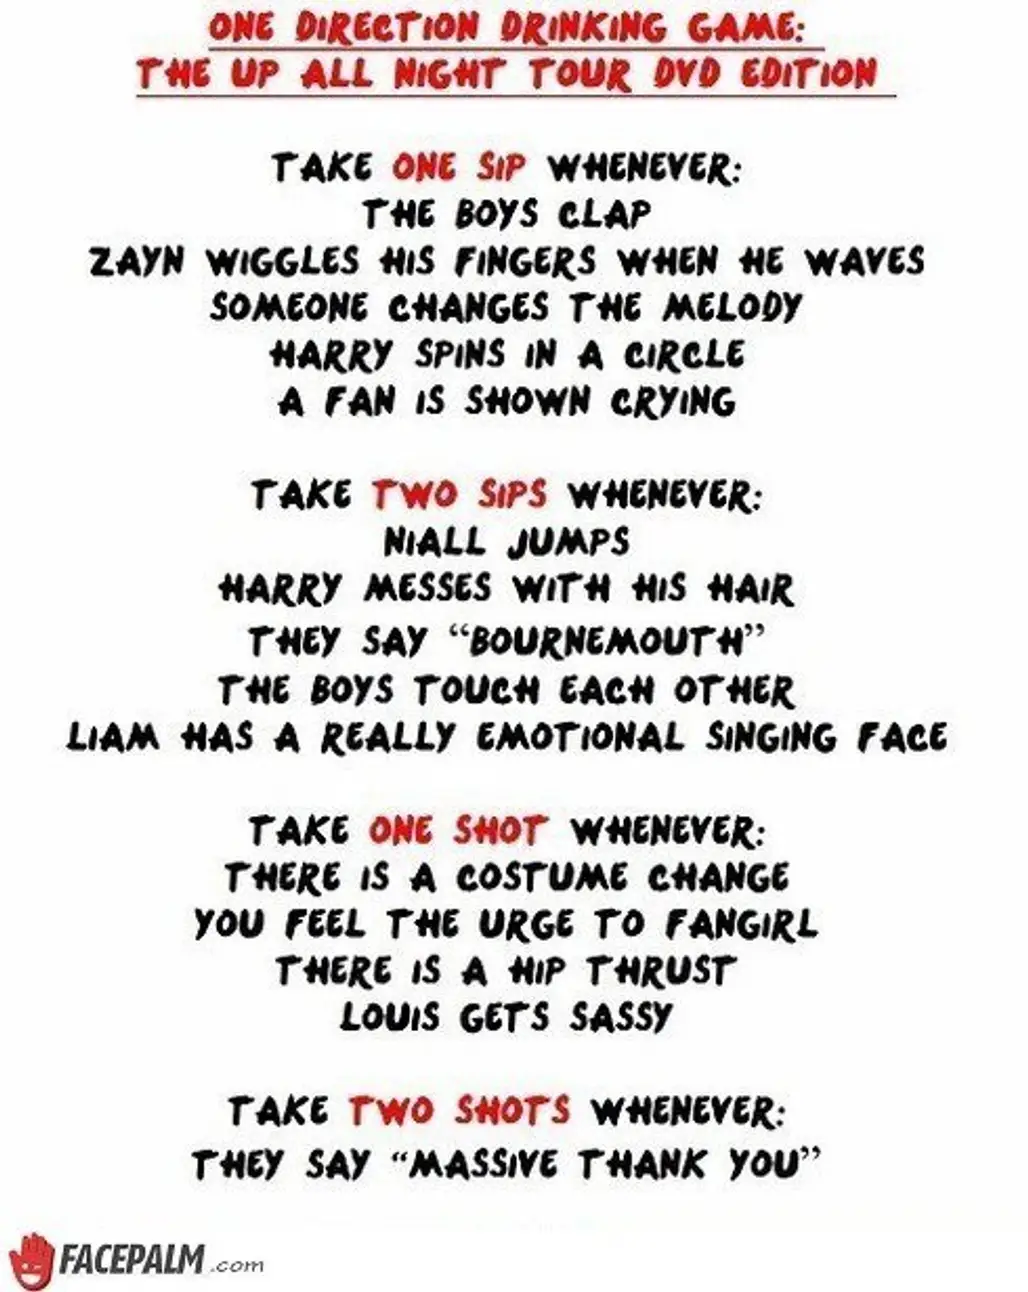 One Direction Drinking Game